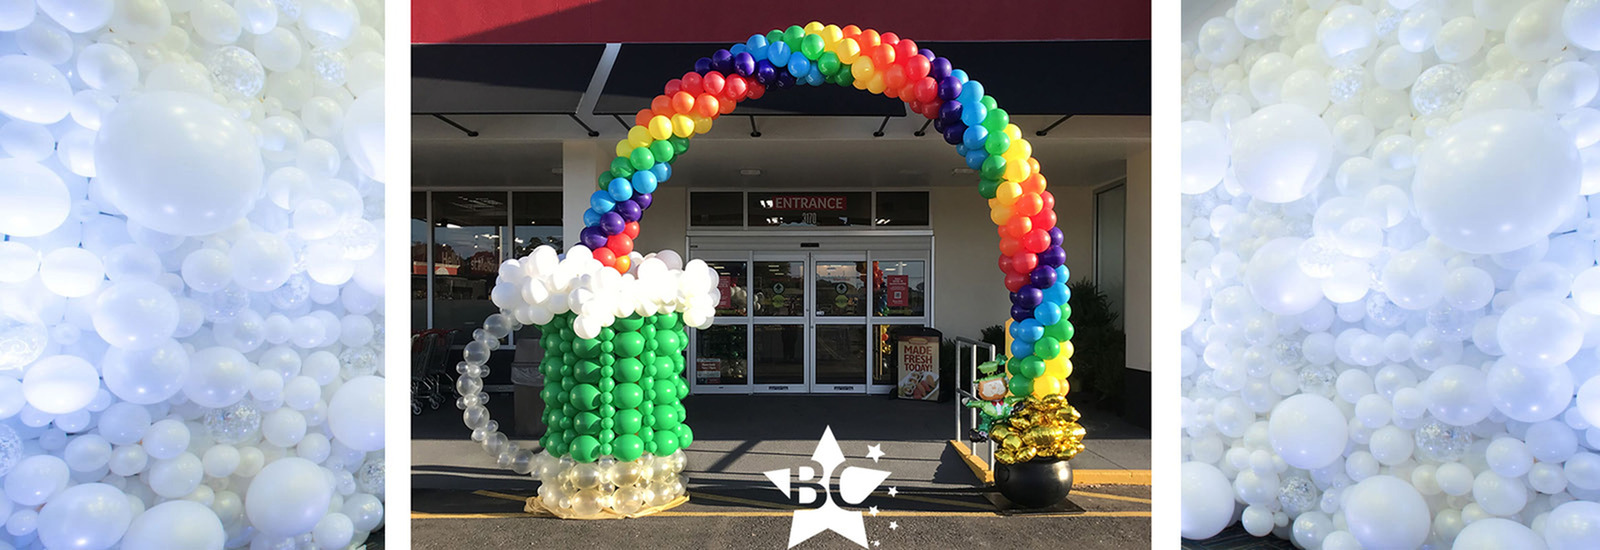 St Patrick's Day Balloon Arch Colorful rainbow arch coming out of a 5 foot tall balloon green beer mug sculpture going over the doorway to a store into a pot of gold with leprechaun. Balloons West Melbourne FL